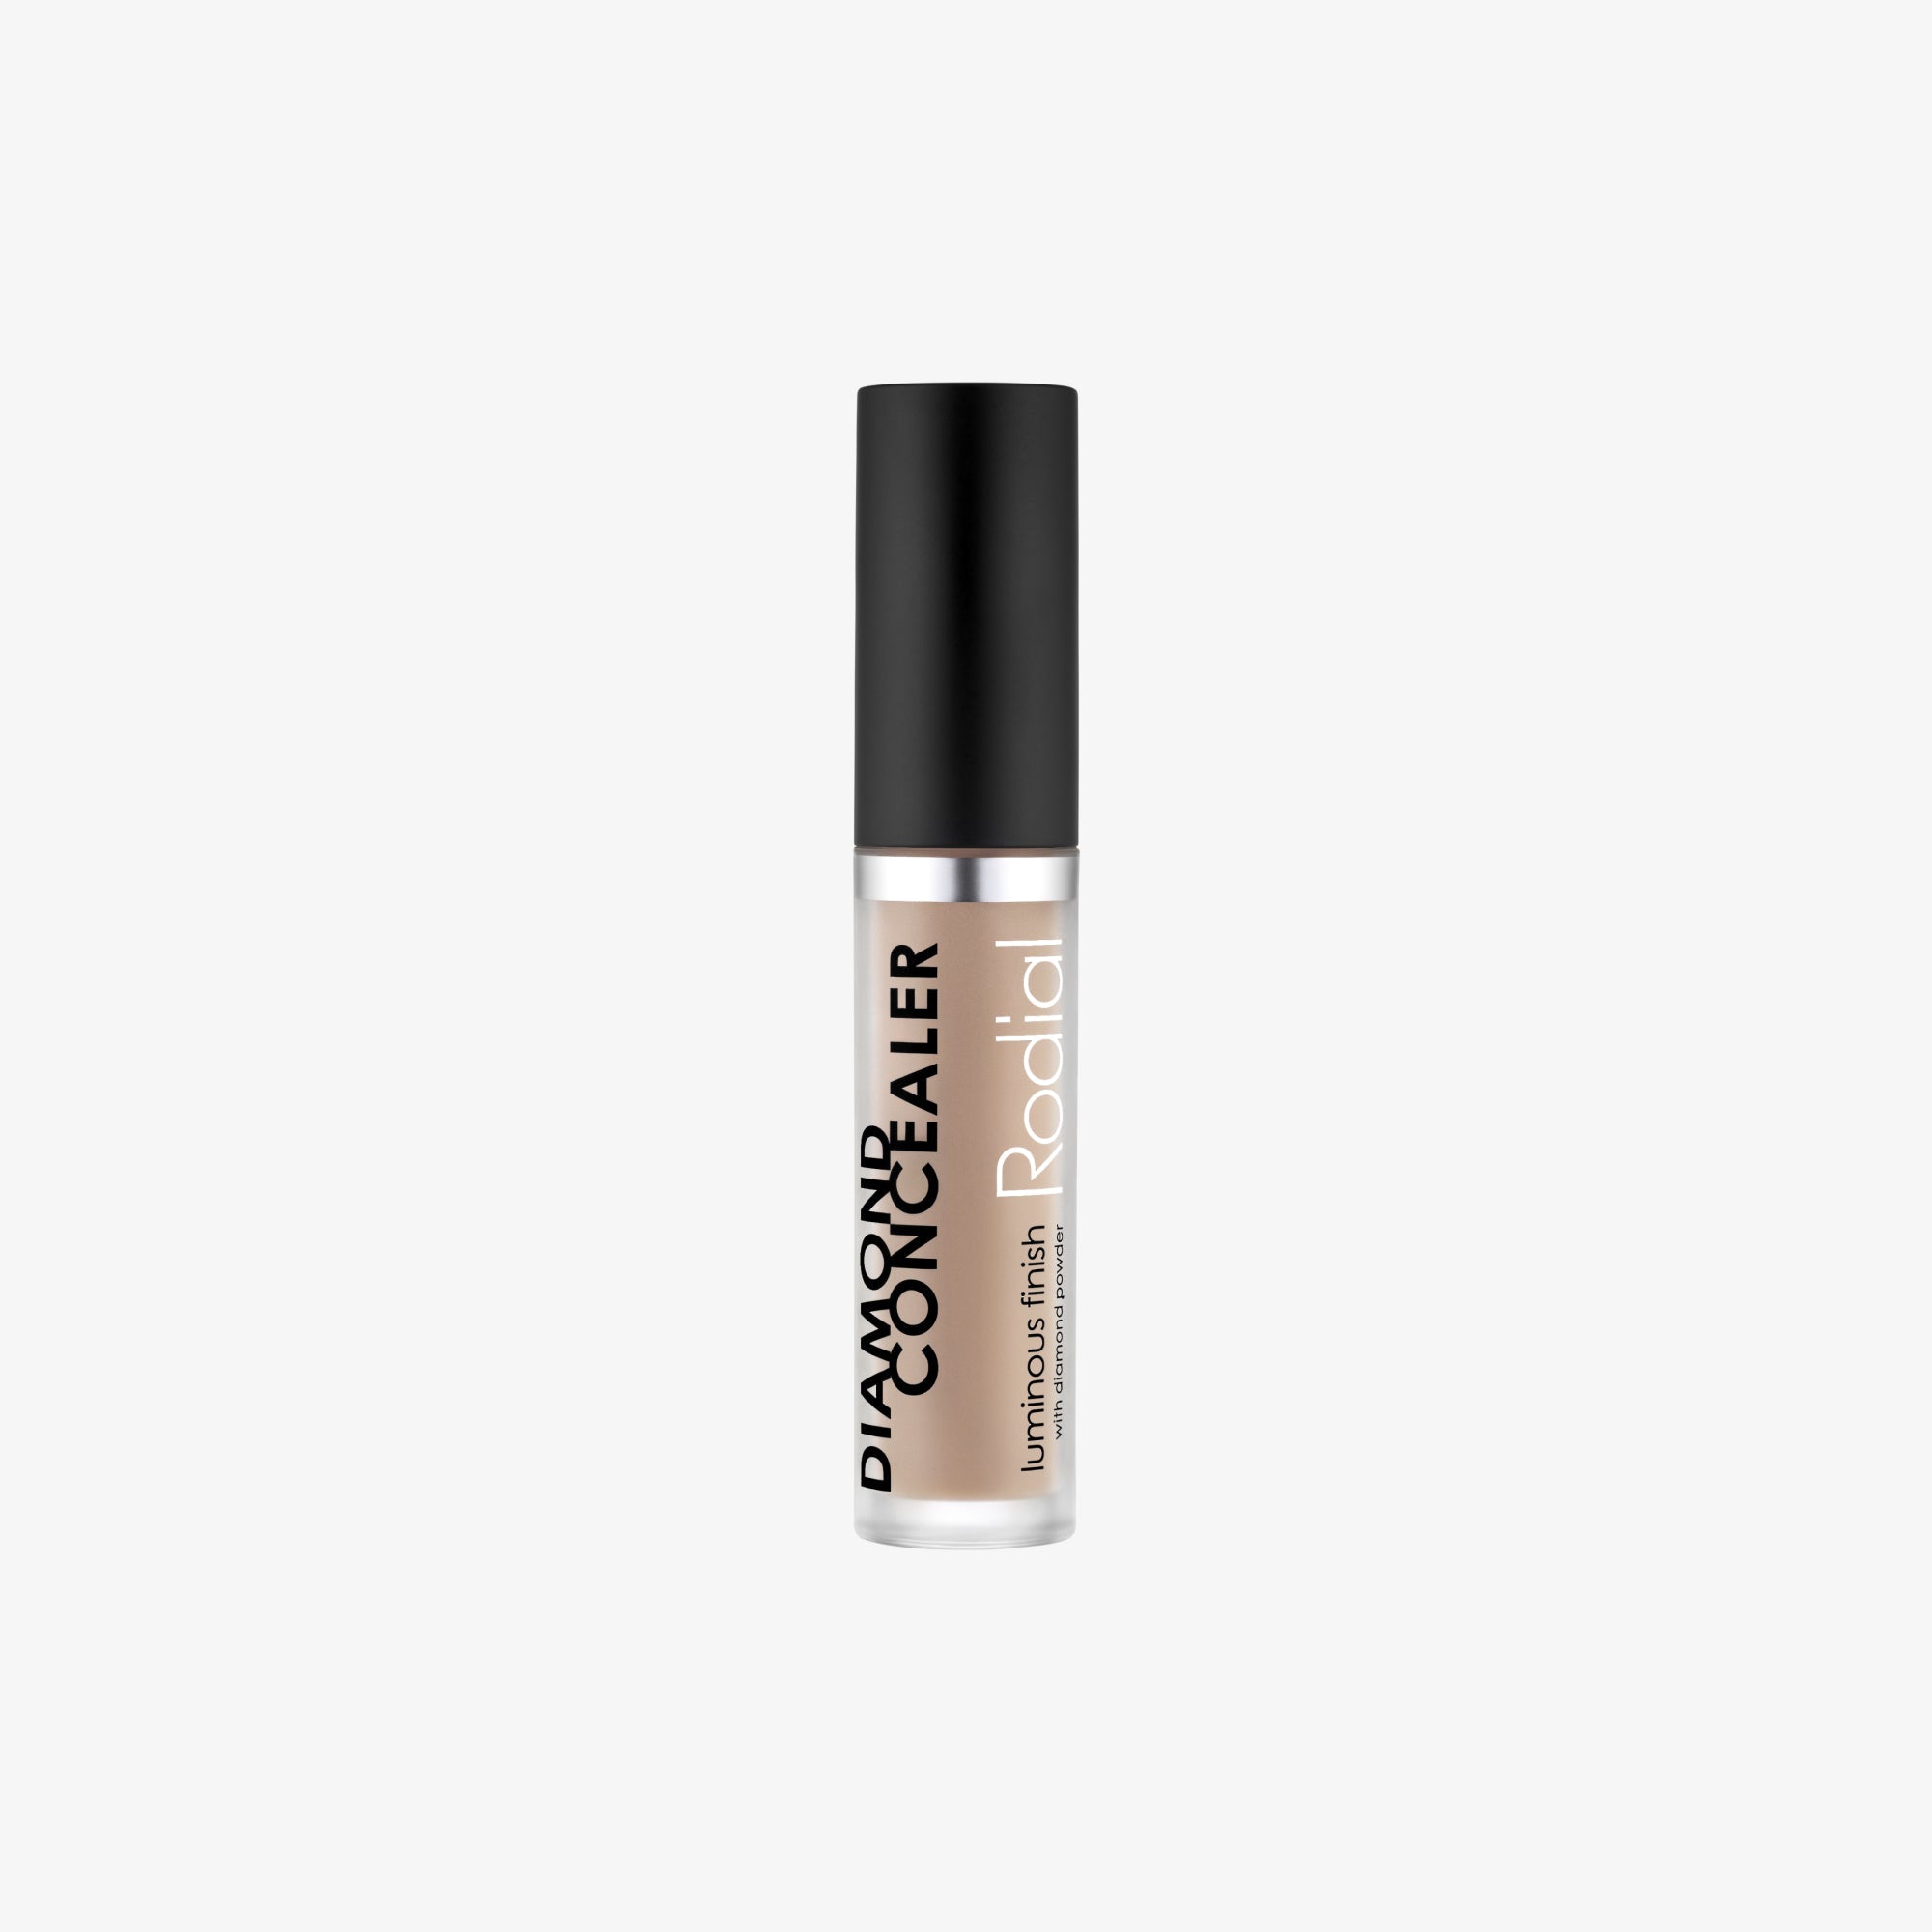 Diamond Concealer - Available In 5 Shades